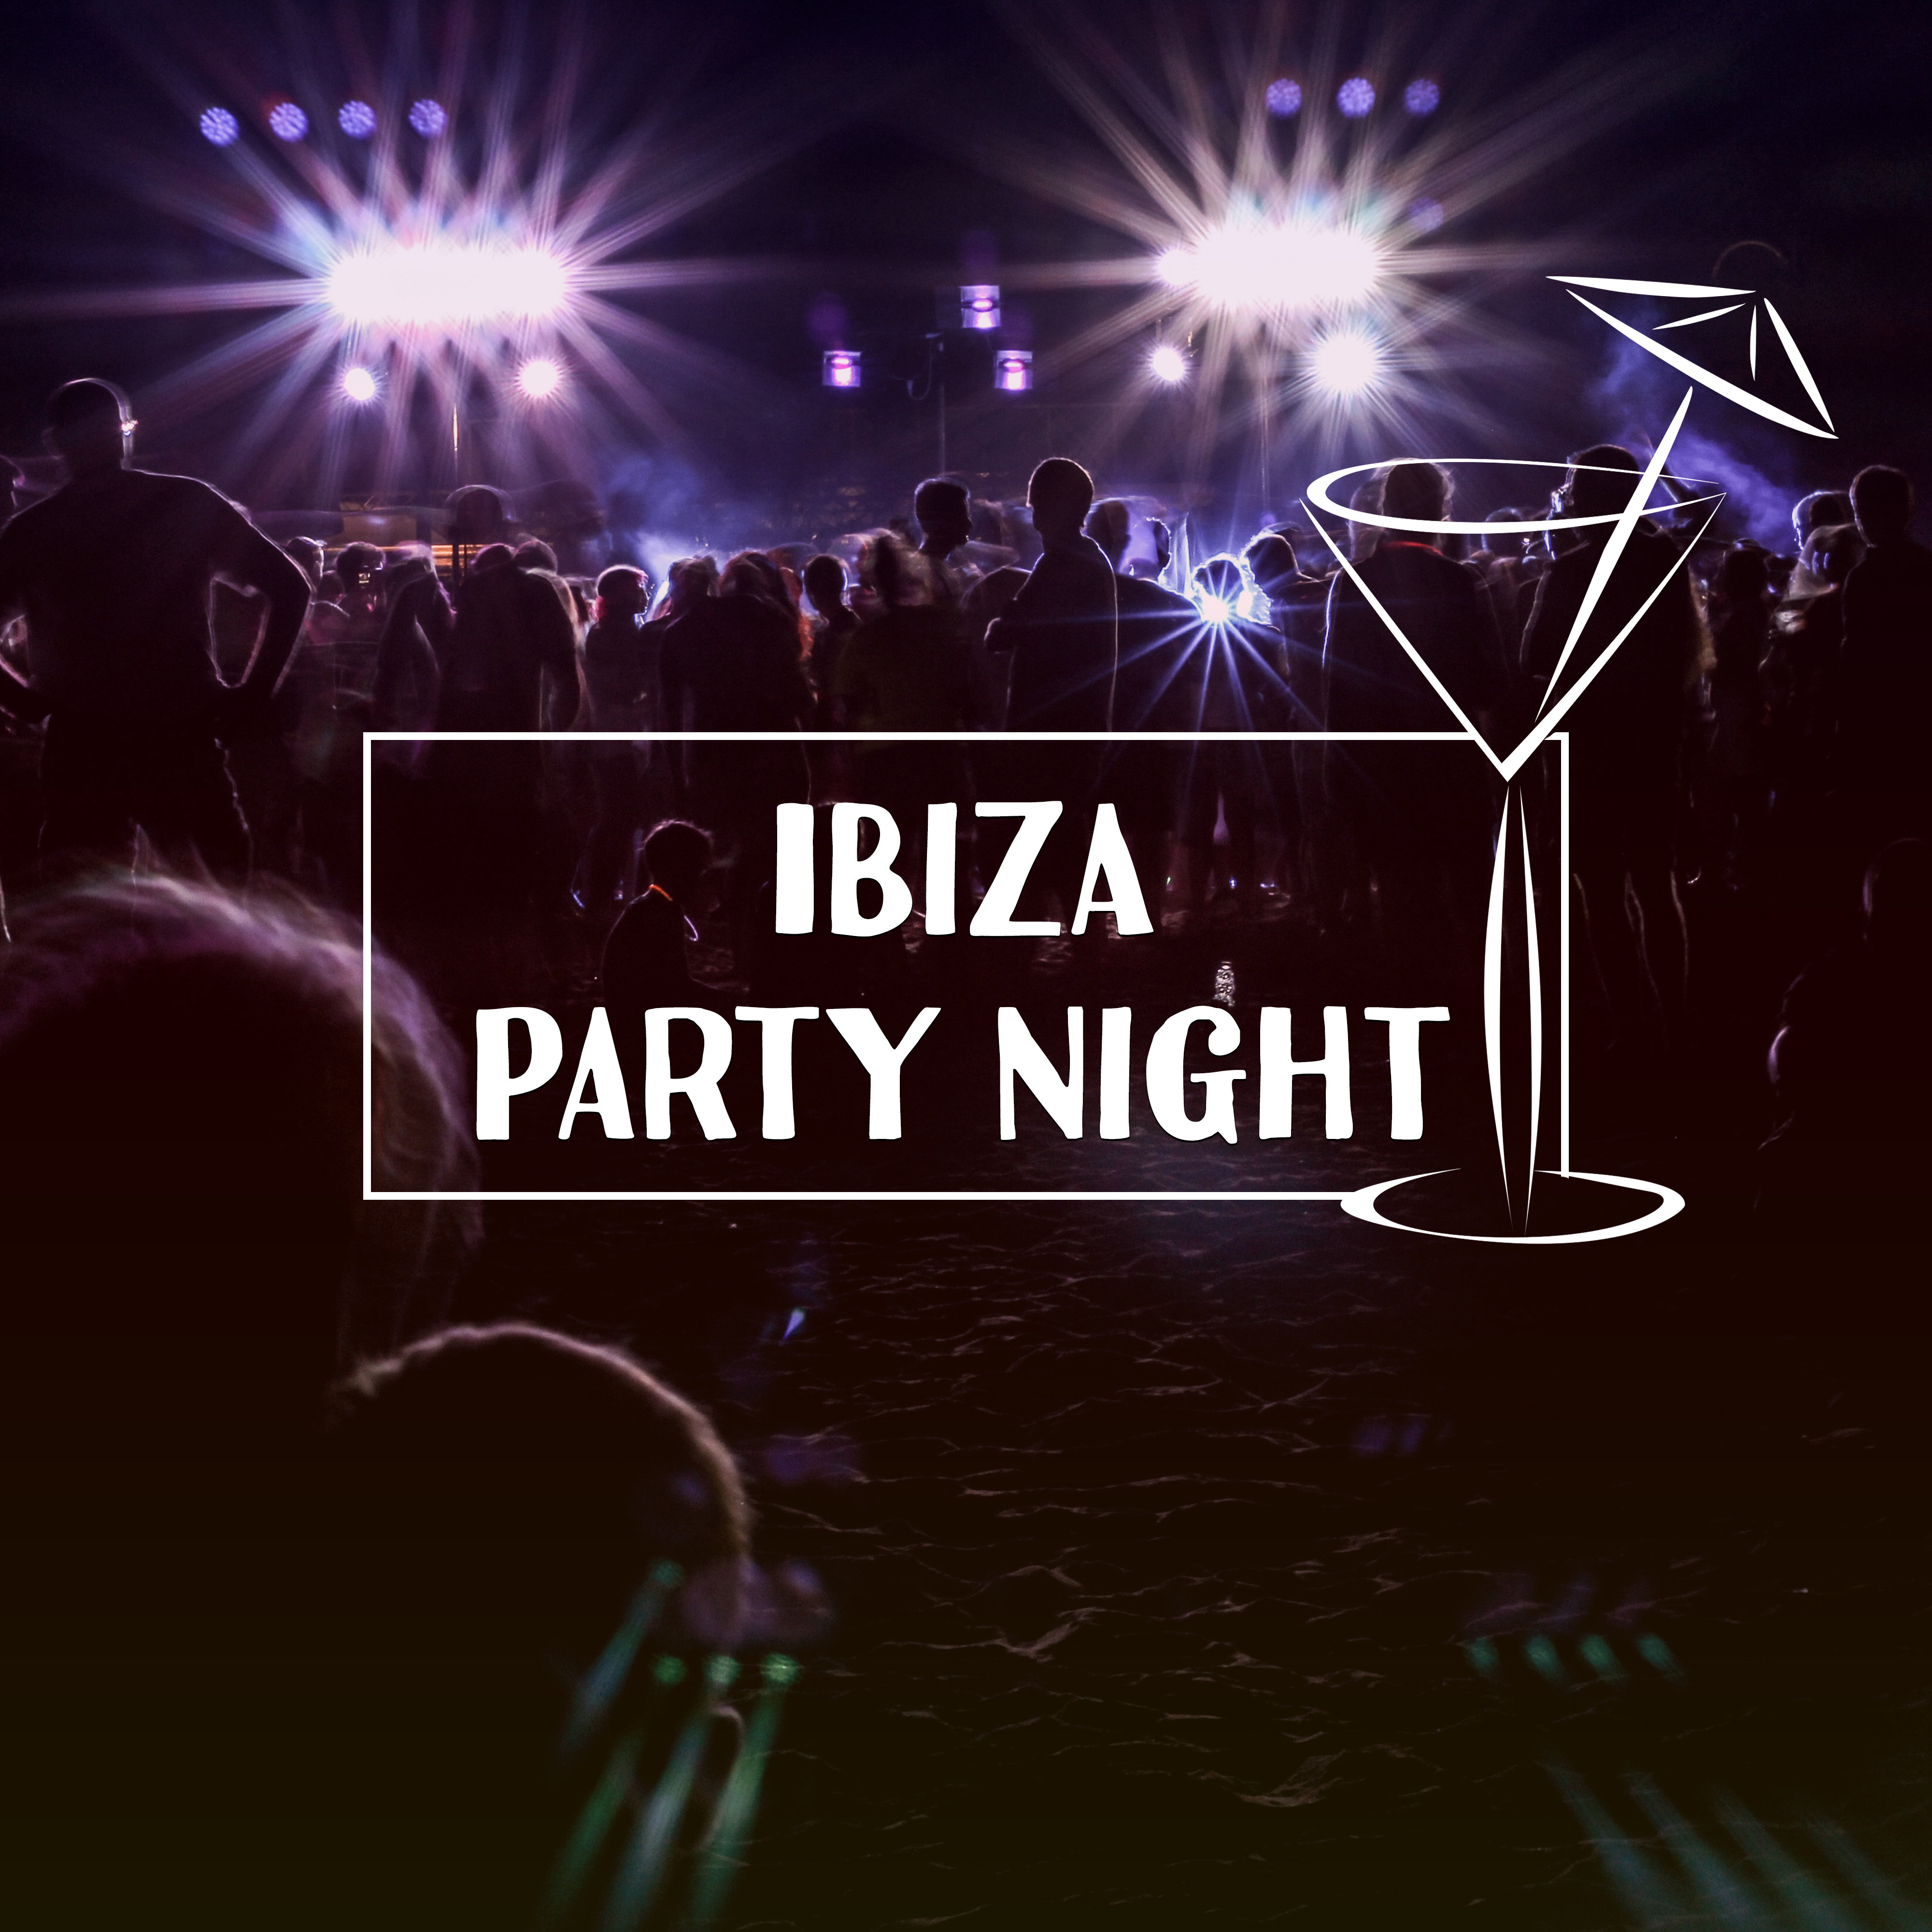 Ibiza Party Night – Summer Chill, Best Music for Dance, Cocktail & Drinks, Summer Vibes, Sounds of Guitar, Beach Party